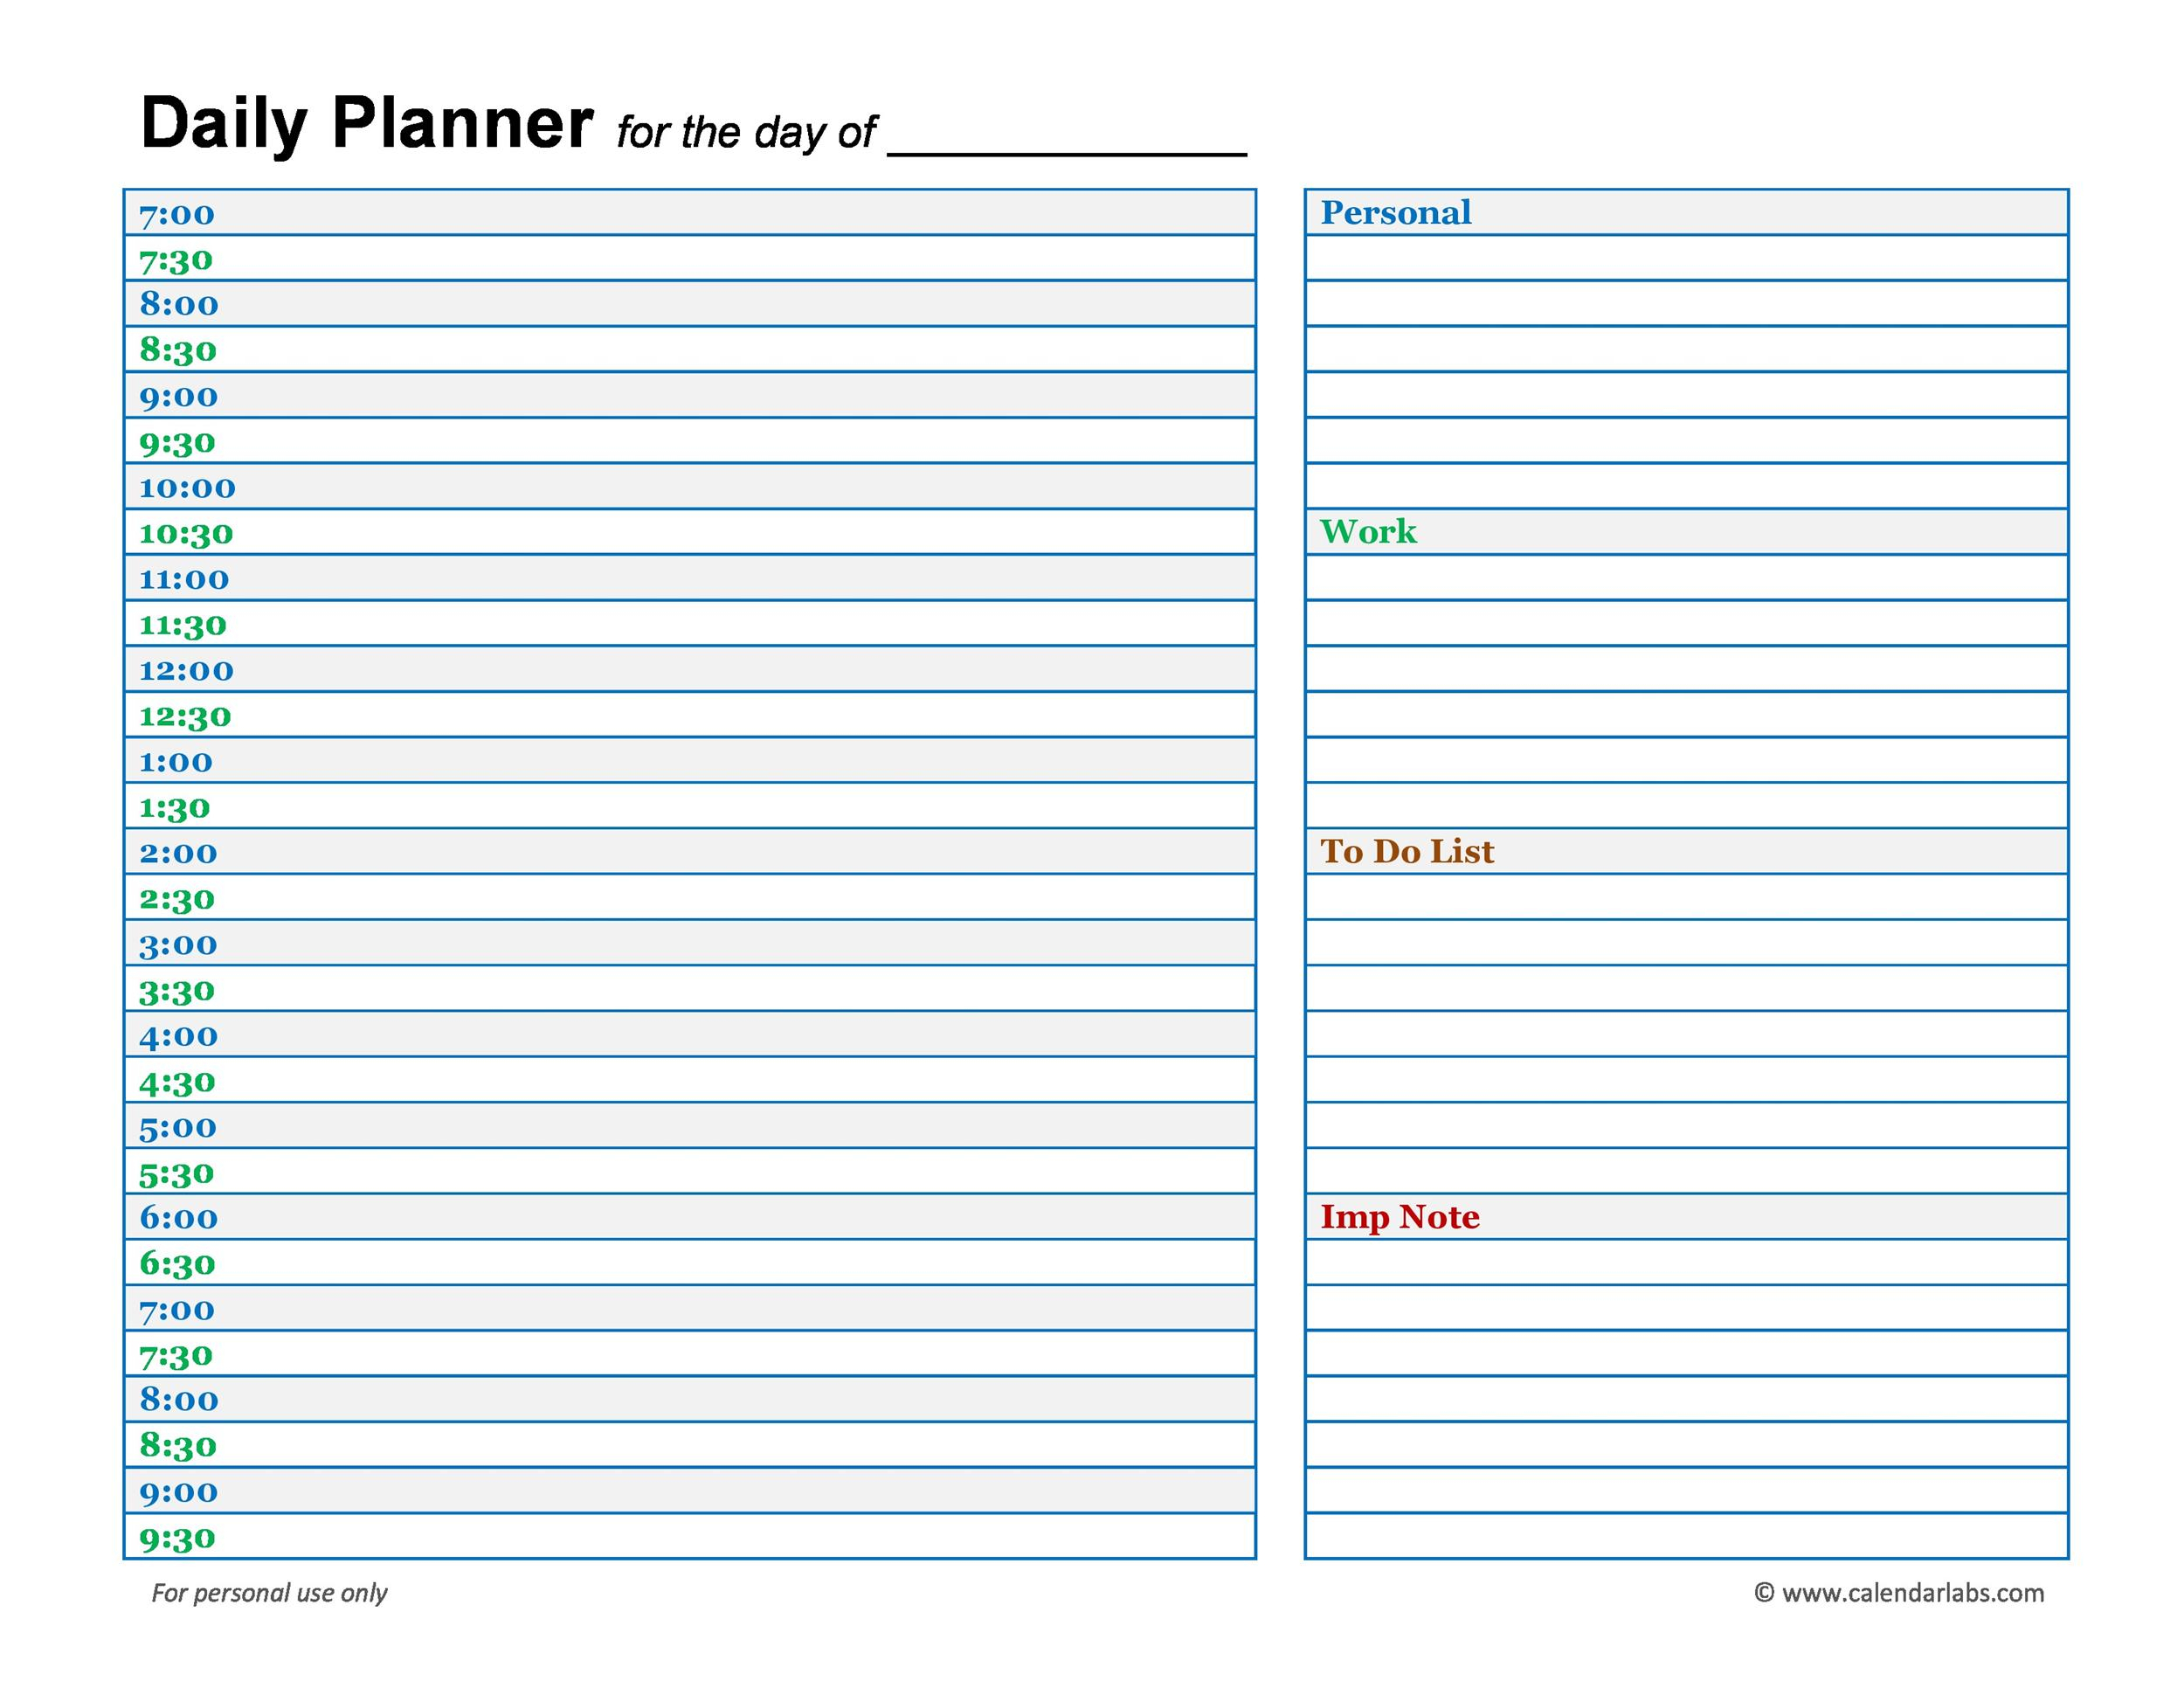 47 Printable Daily Planner Templates (Free In Wordexcelpdf) within Free Daily Calendar Template